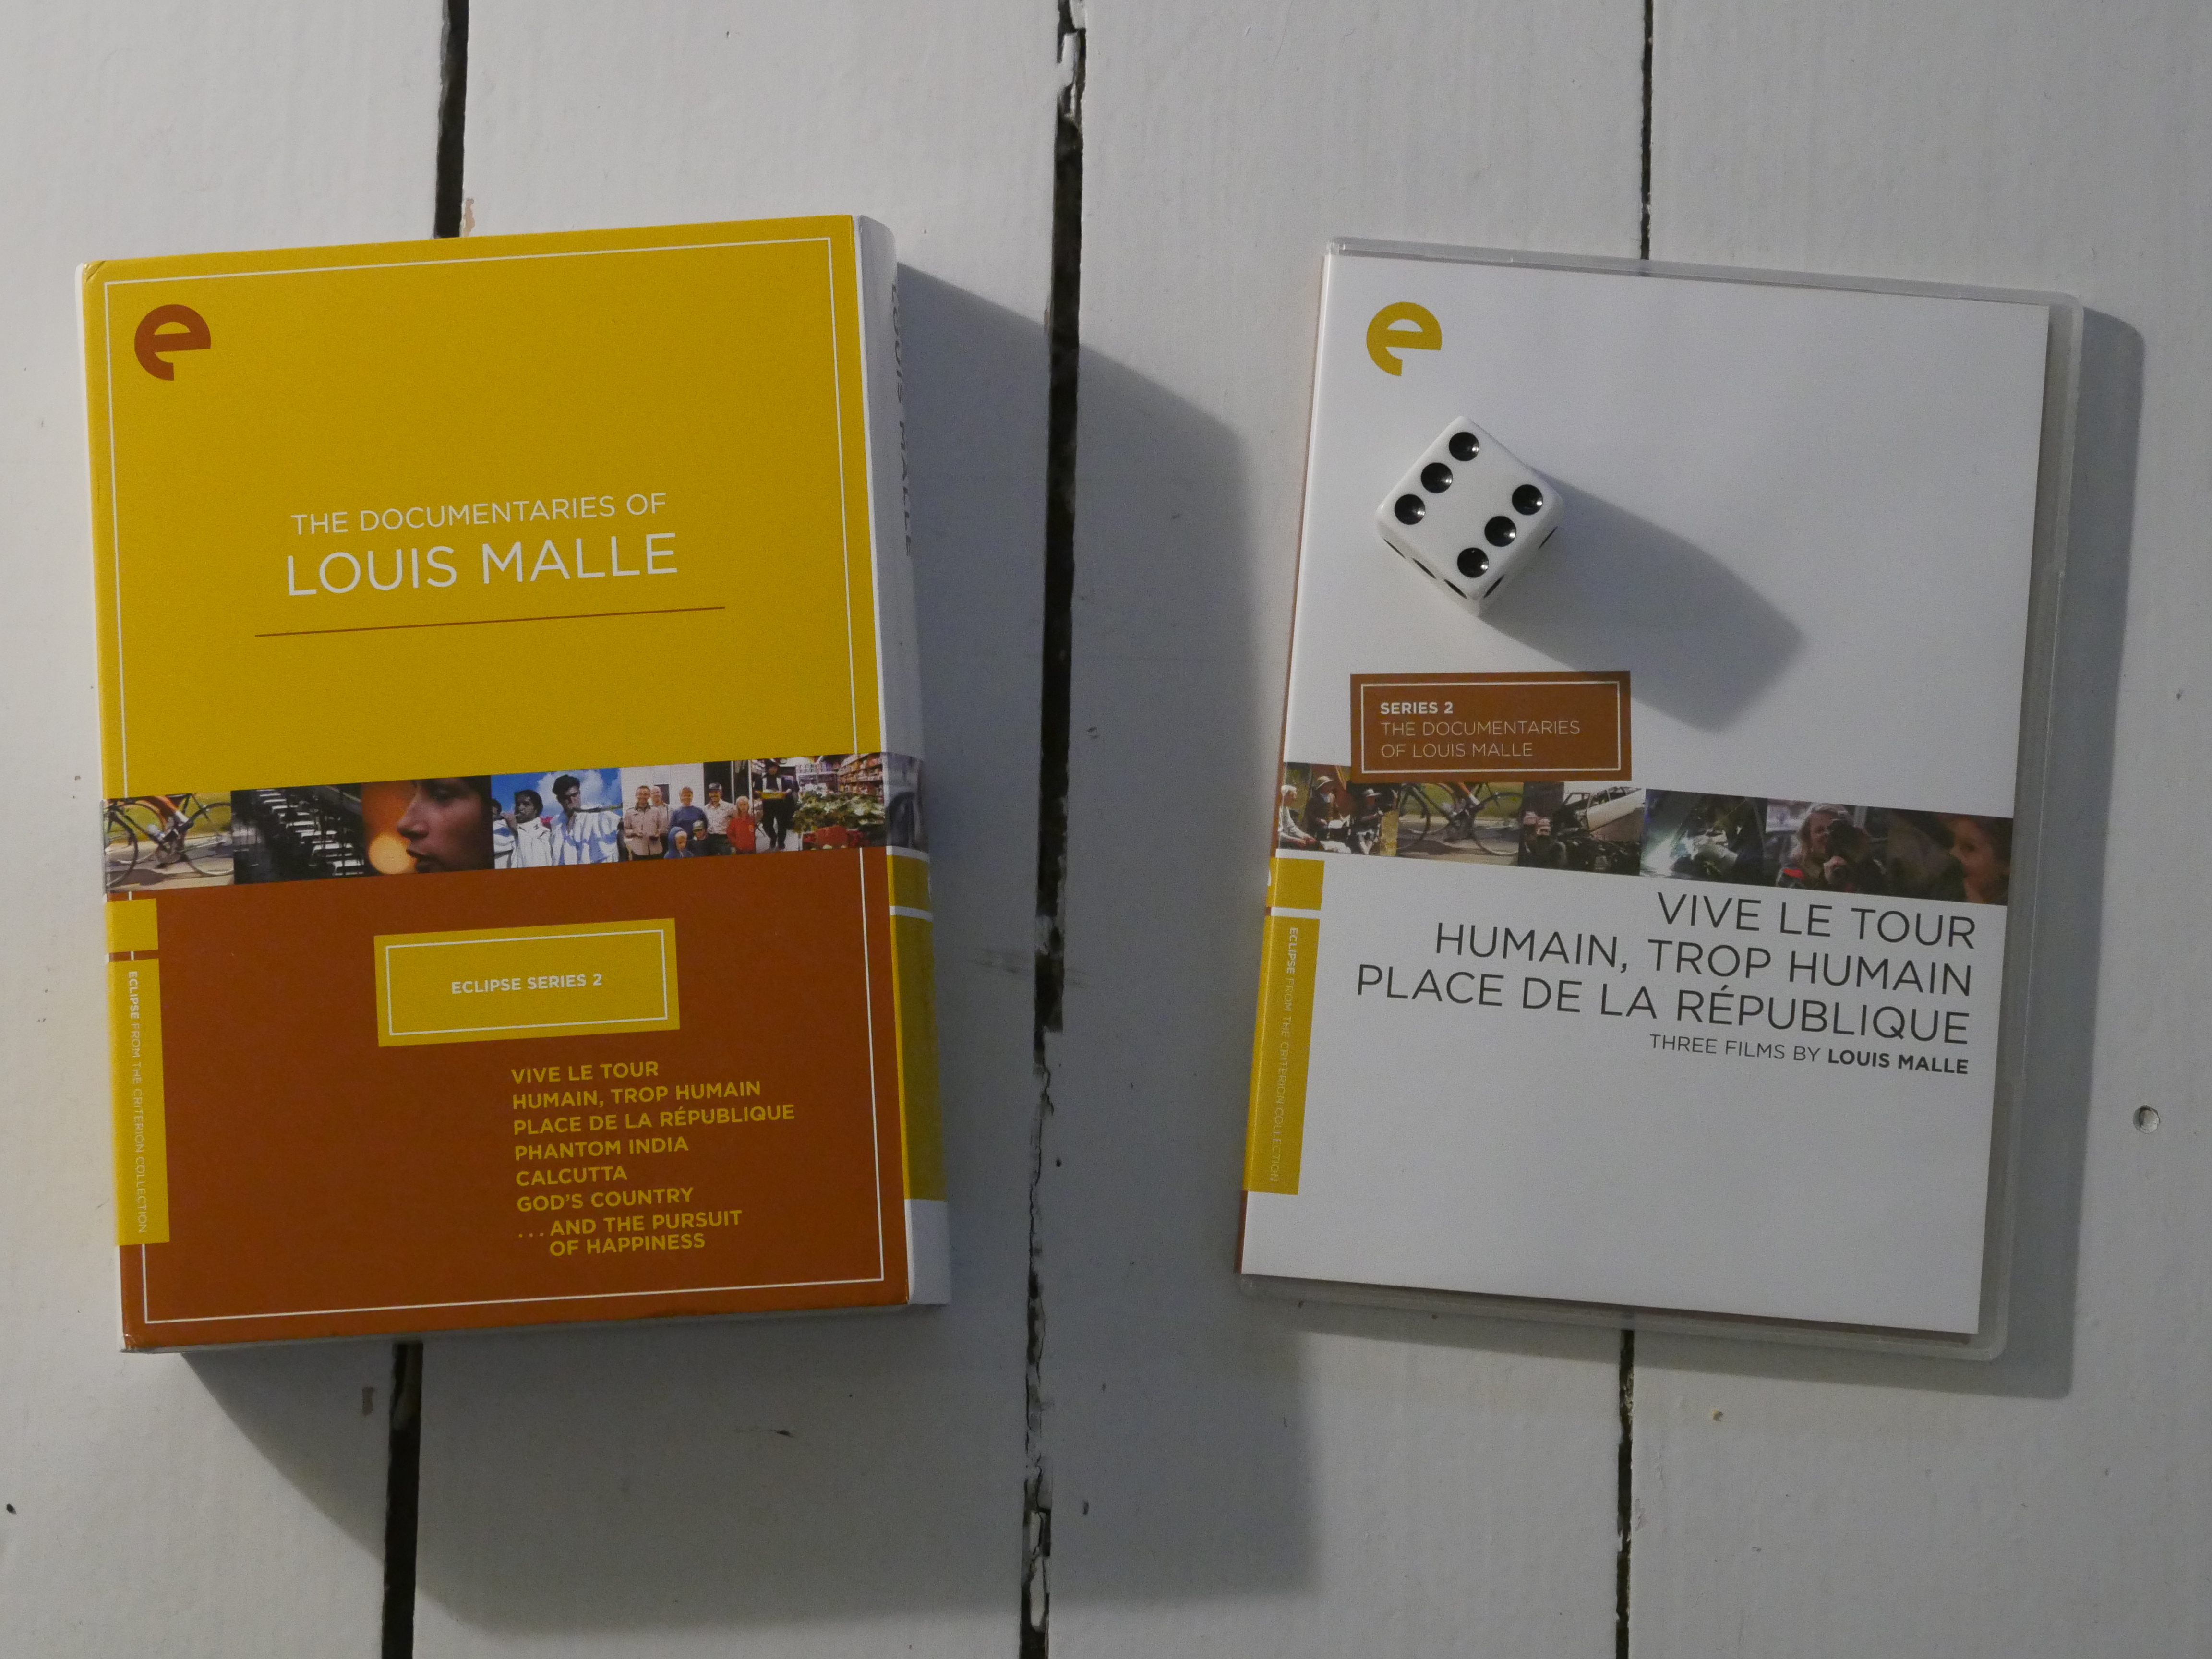  Eclipse Series 2: The Documentaries of Louis Malle